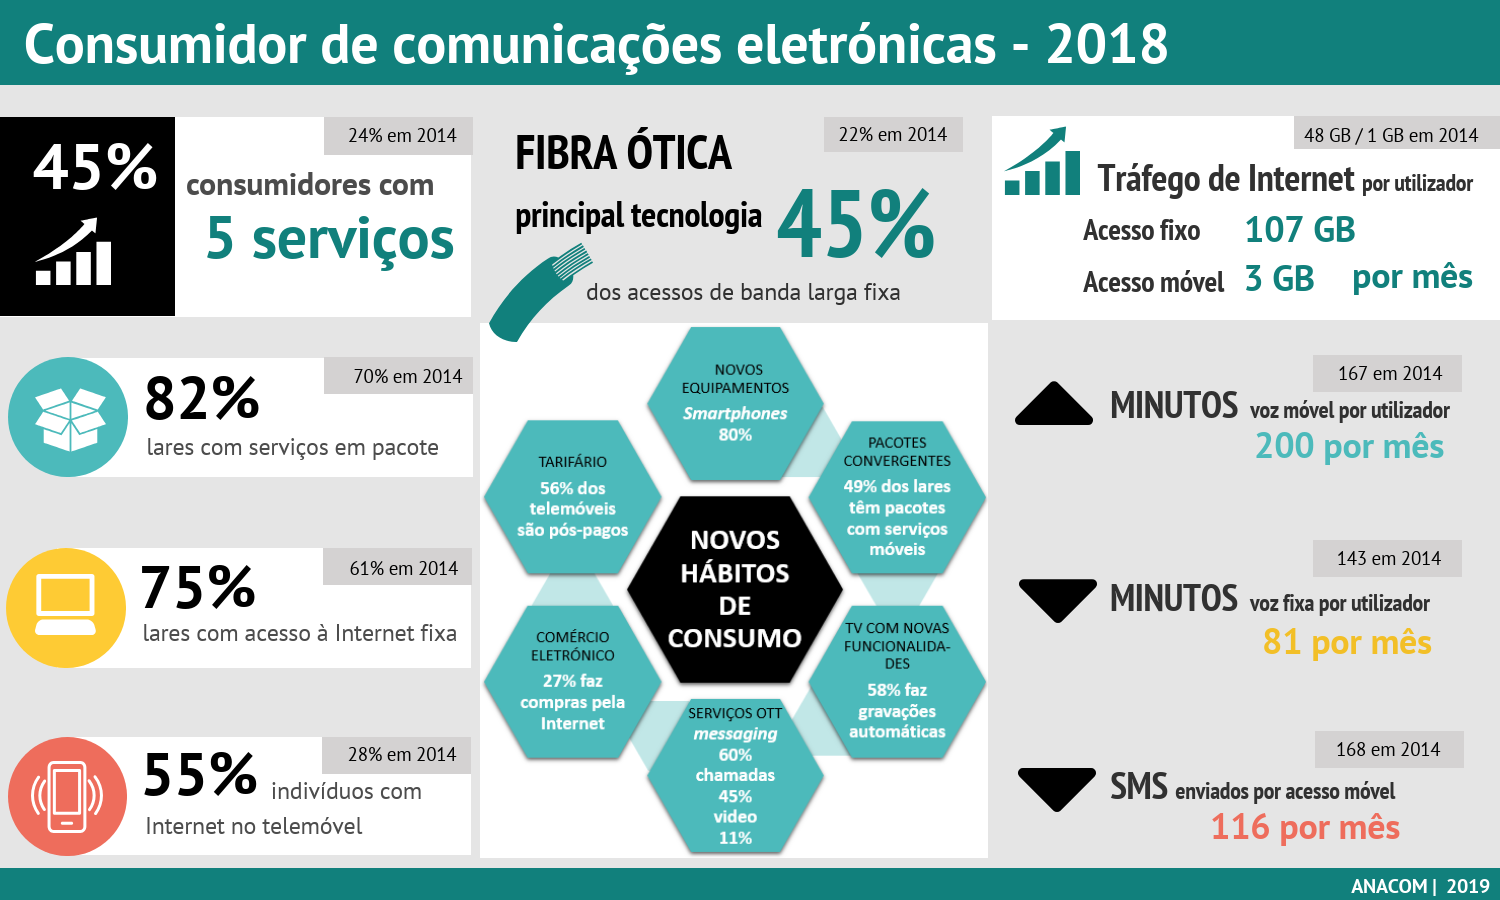 Infographic: Consumer Day - The electronic communications consumer in 2018 (available in Portuguese)